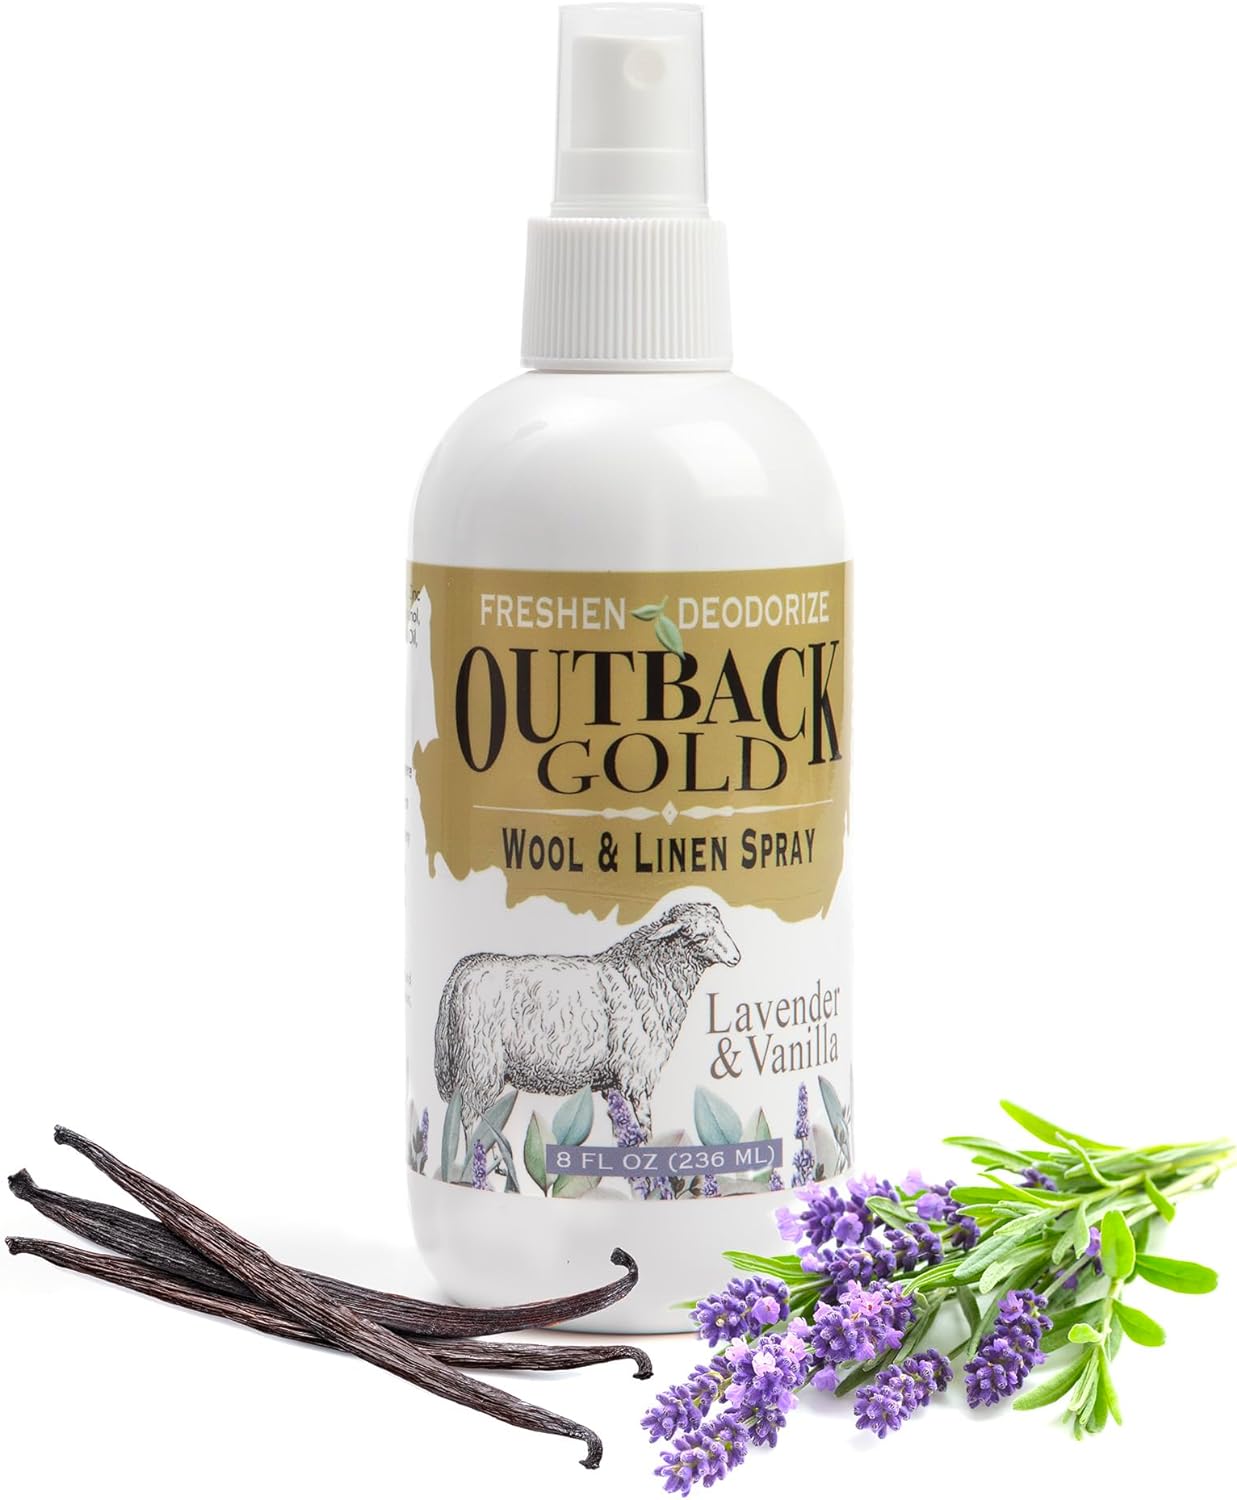 Outback Gold Wool, Linen, Fabric Refresher and Deodorizer Spray, Scented with Natural Lavender and Vanilla Essential Oils